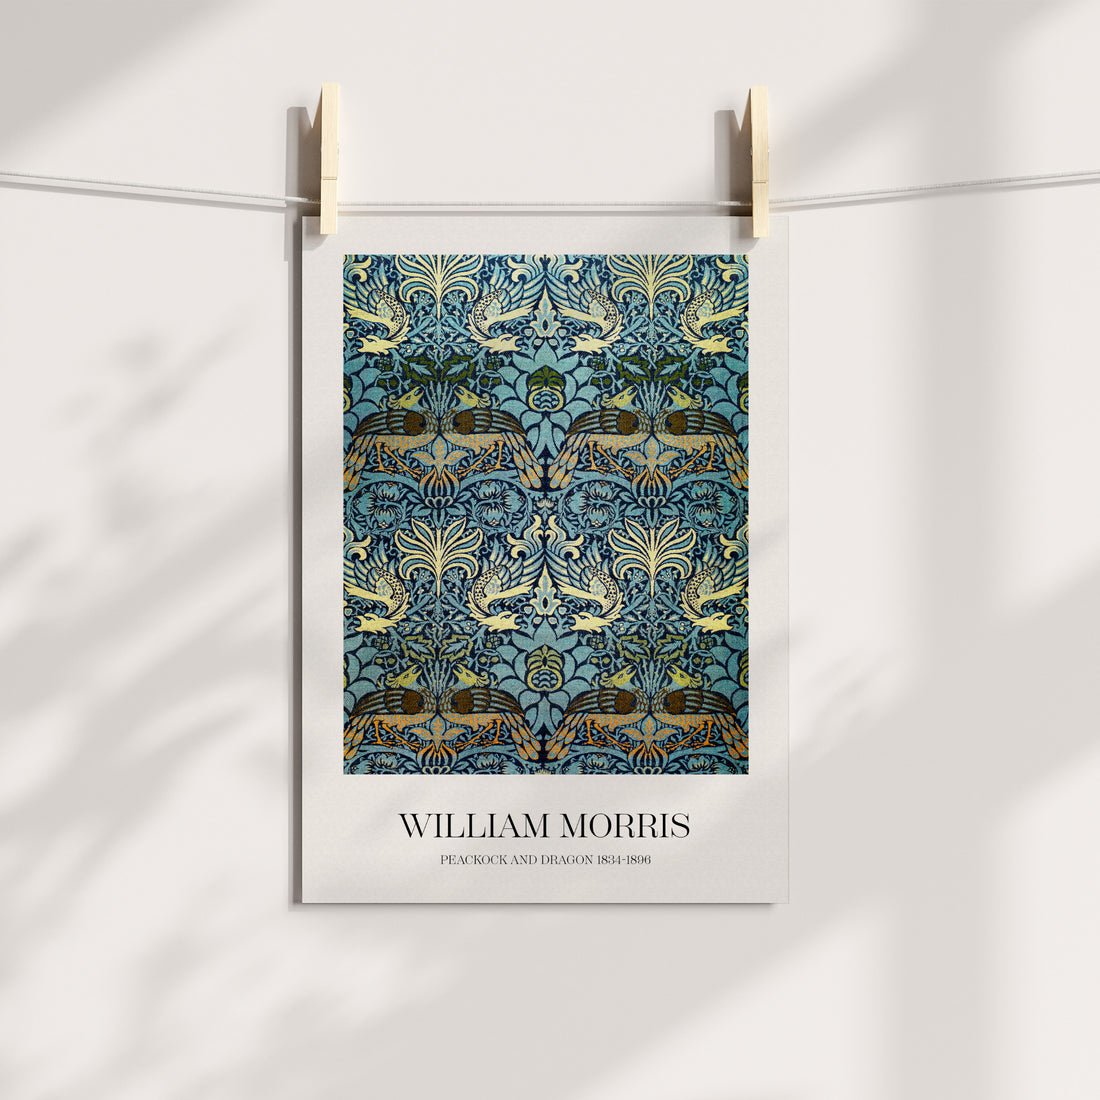 Peacock and Dragon by William Morris Gallery Printable Art